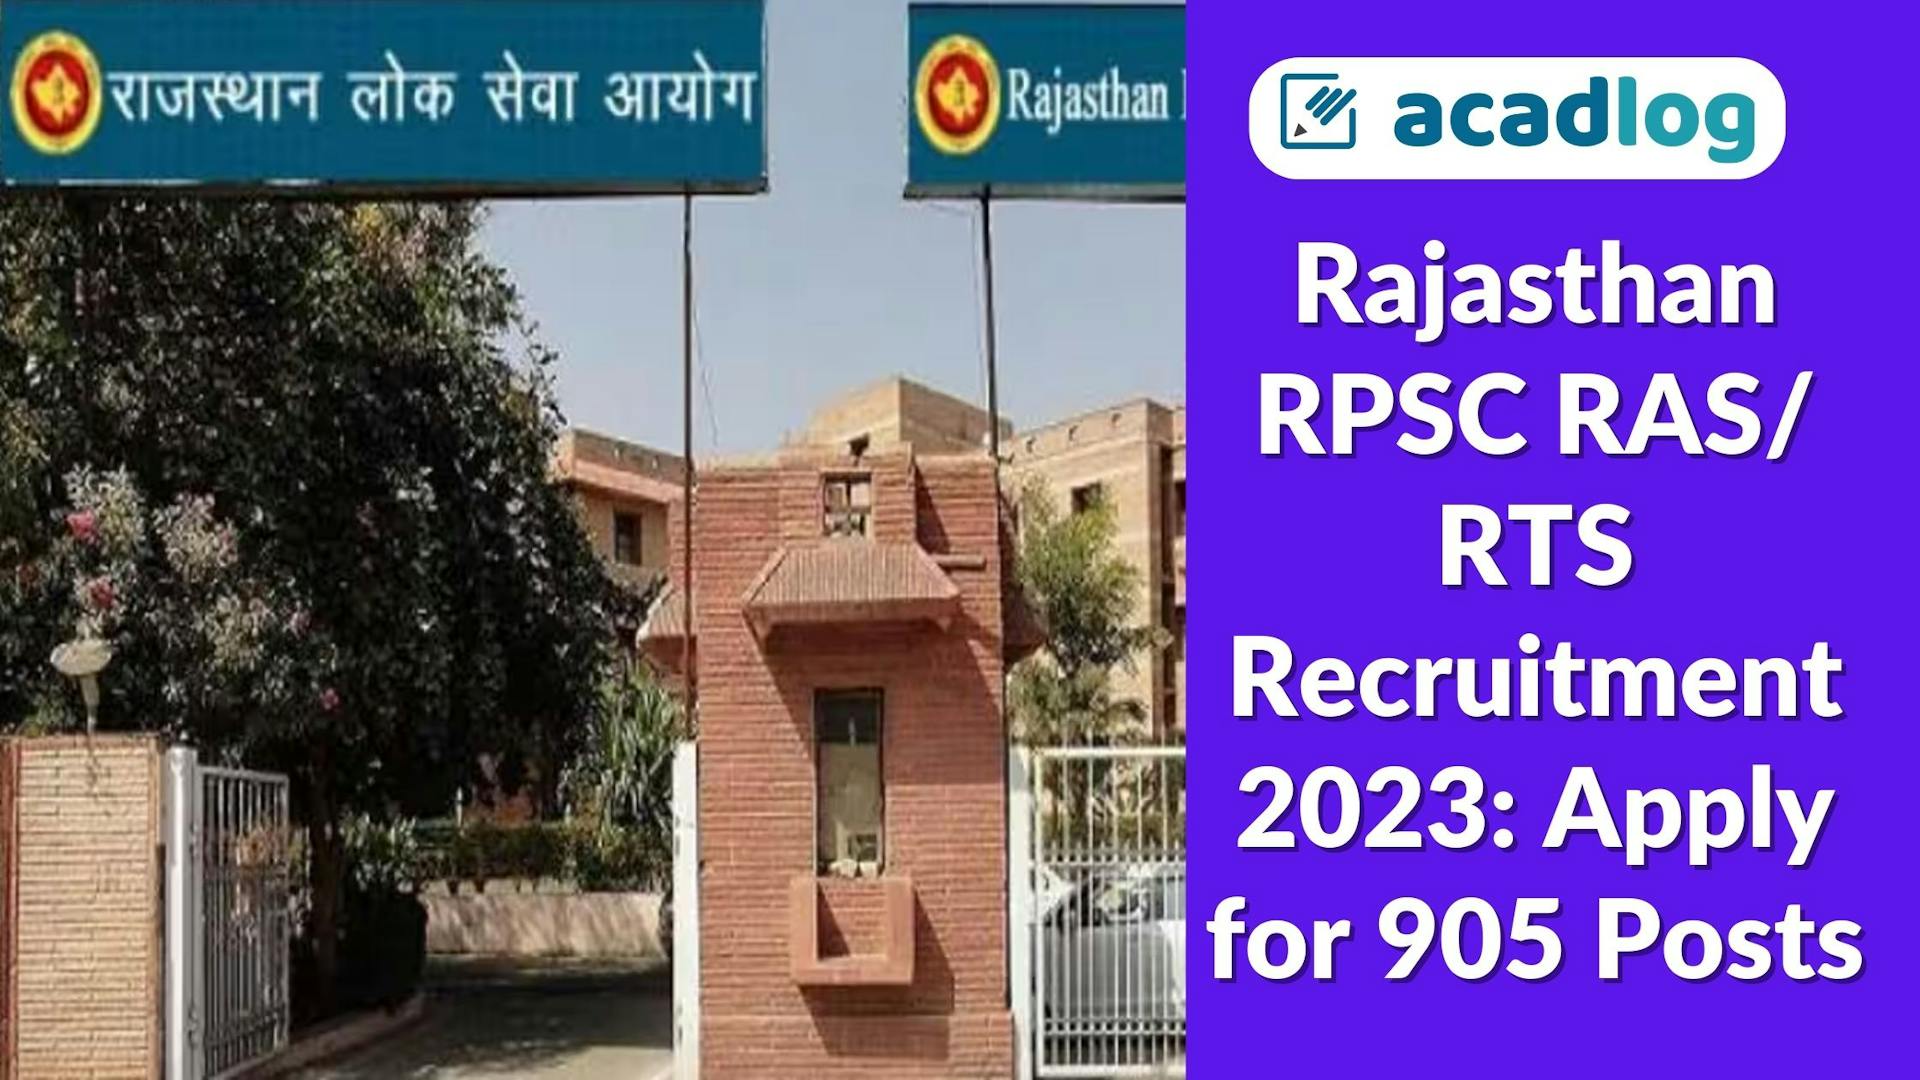 Rajasthan RPSC RAS/ RTS Recruitment 2023: Apply for 905 Posts